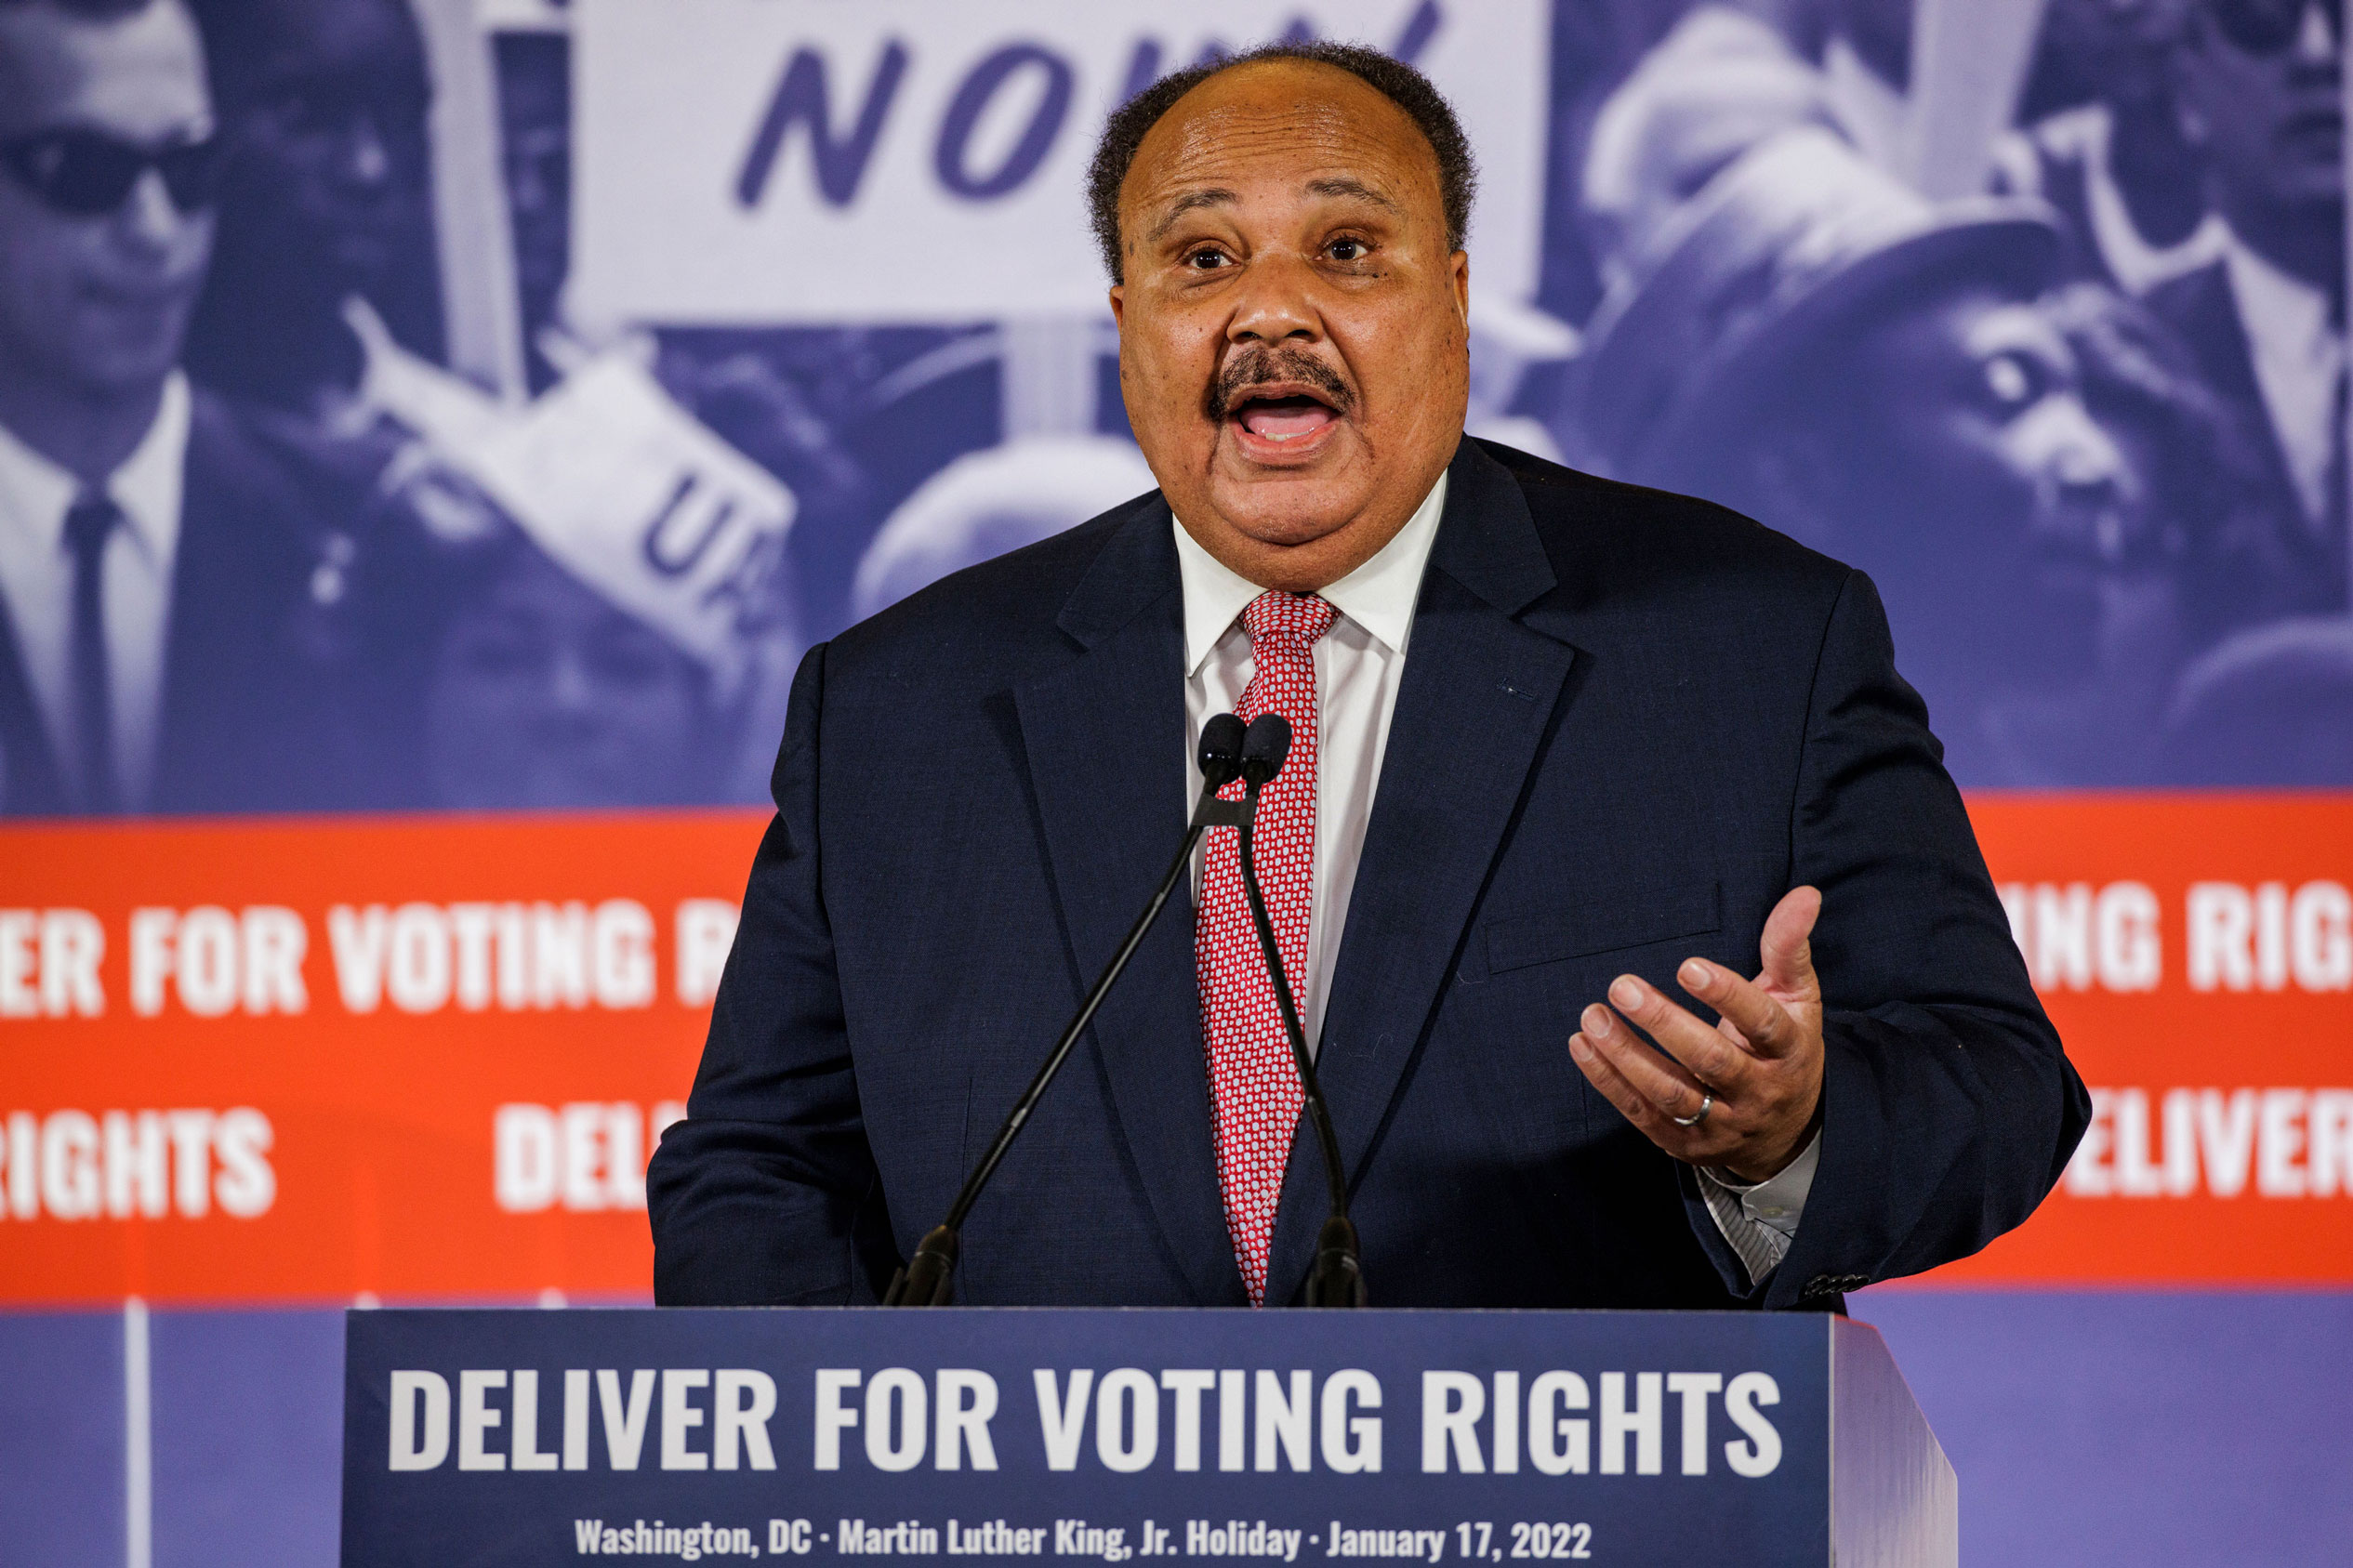 Martin Luther King III, speaking at a news conference with House Speaker Nancy Pelosi at Union Station in Washington, DC on Monday.